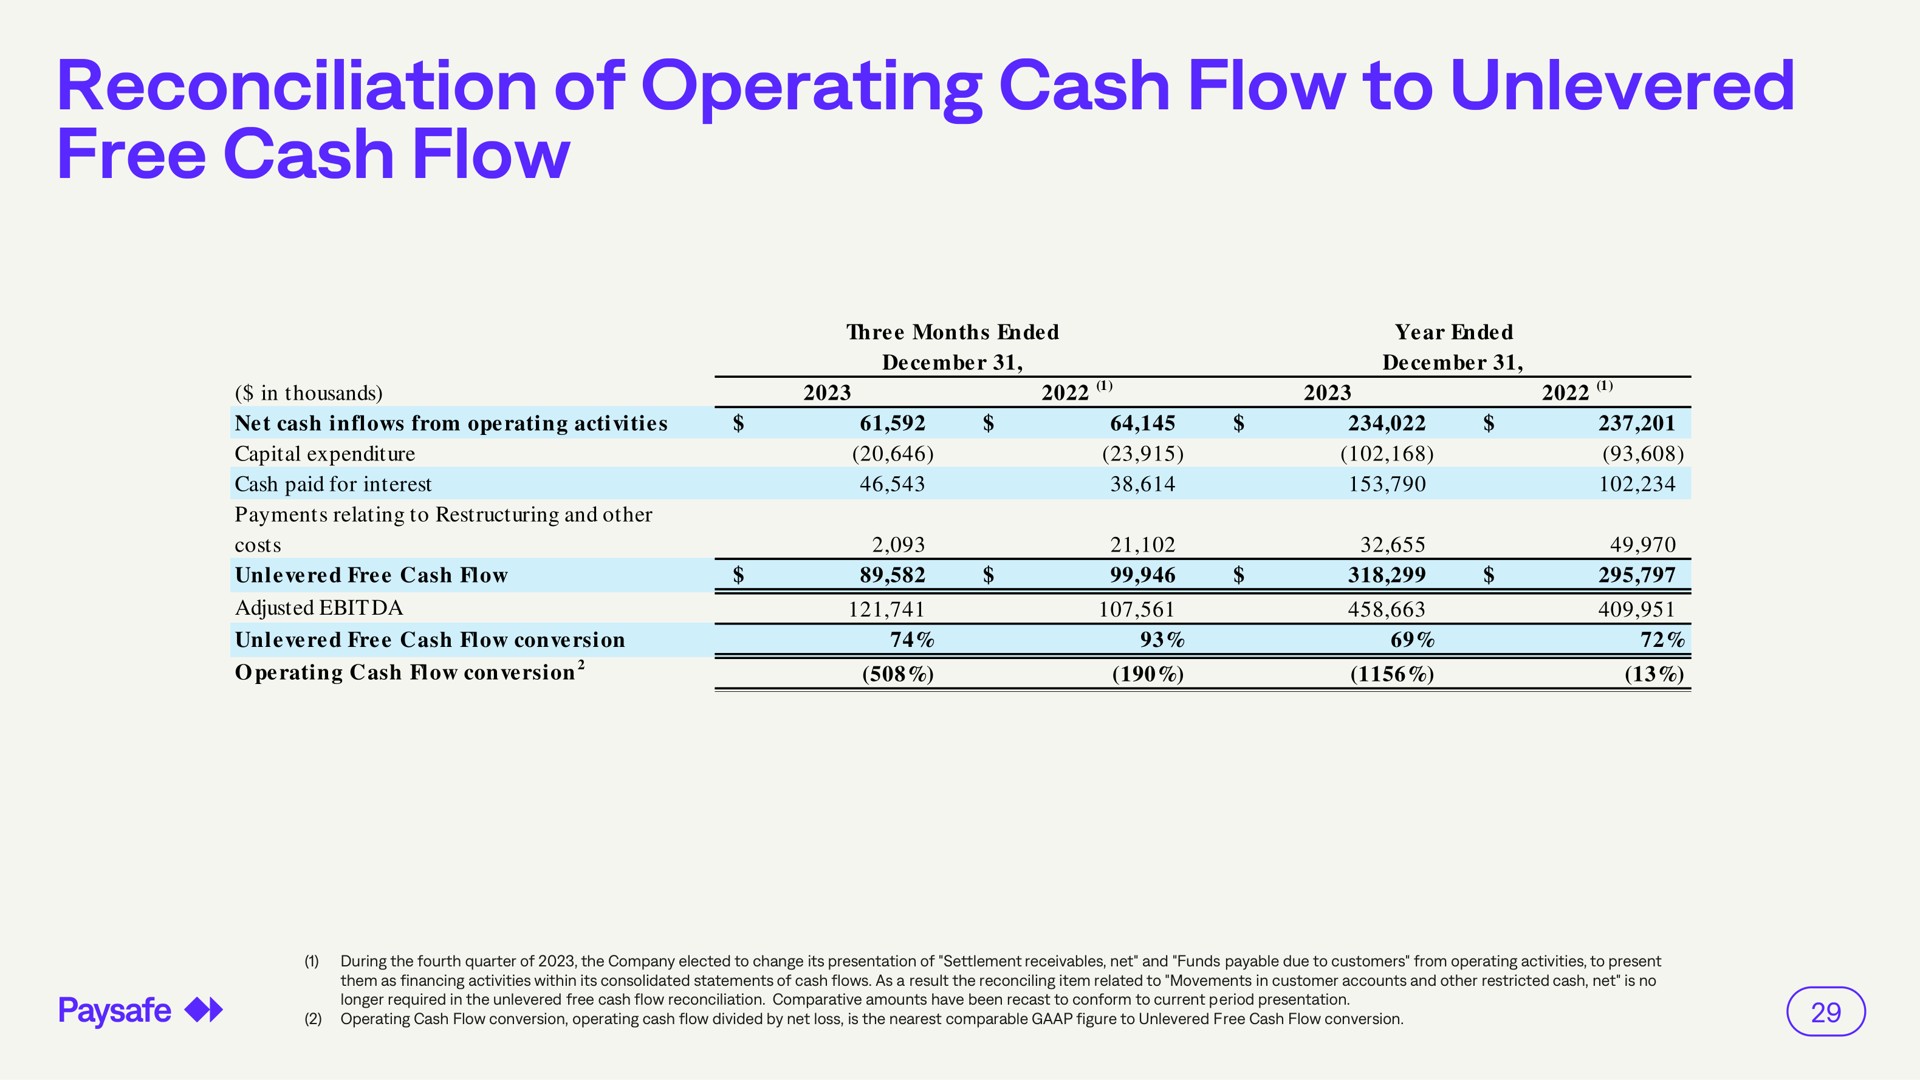 reconciliation of operating cash flow to free cash flow | Paysafe